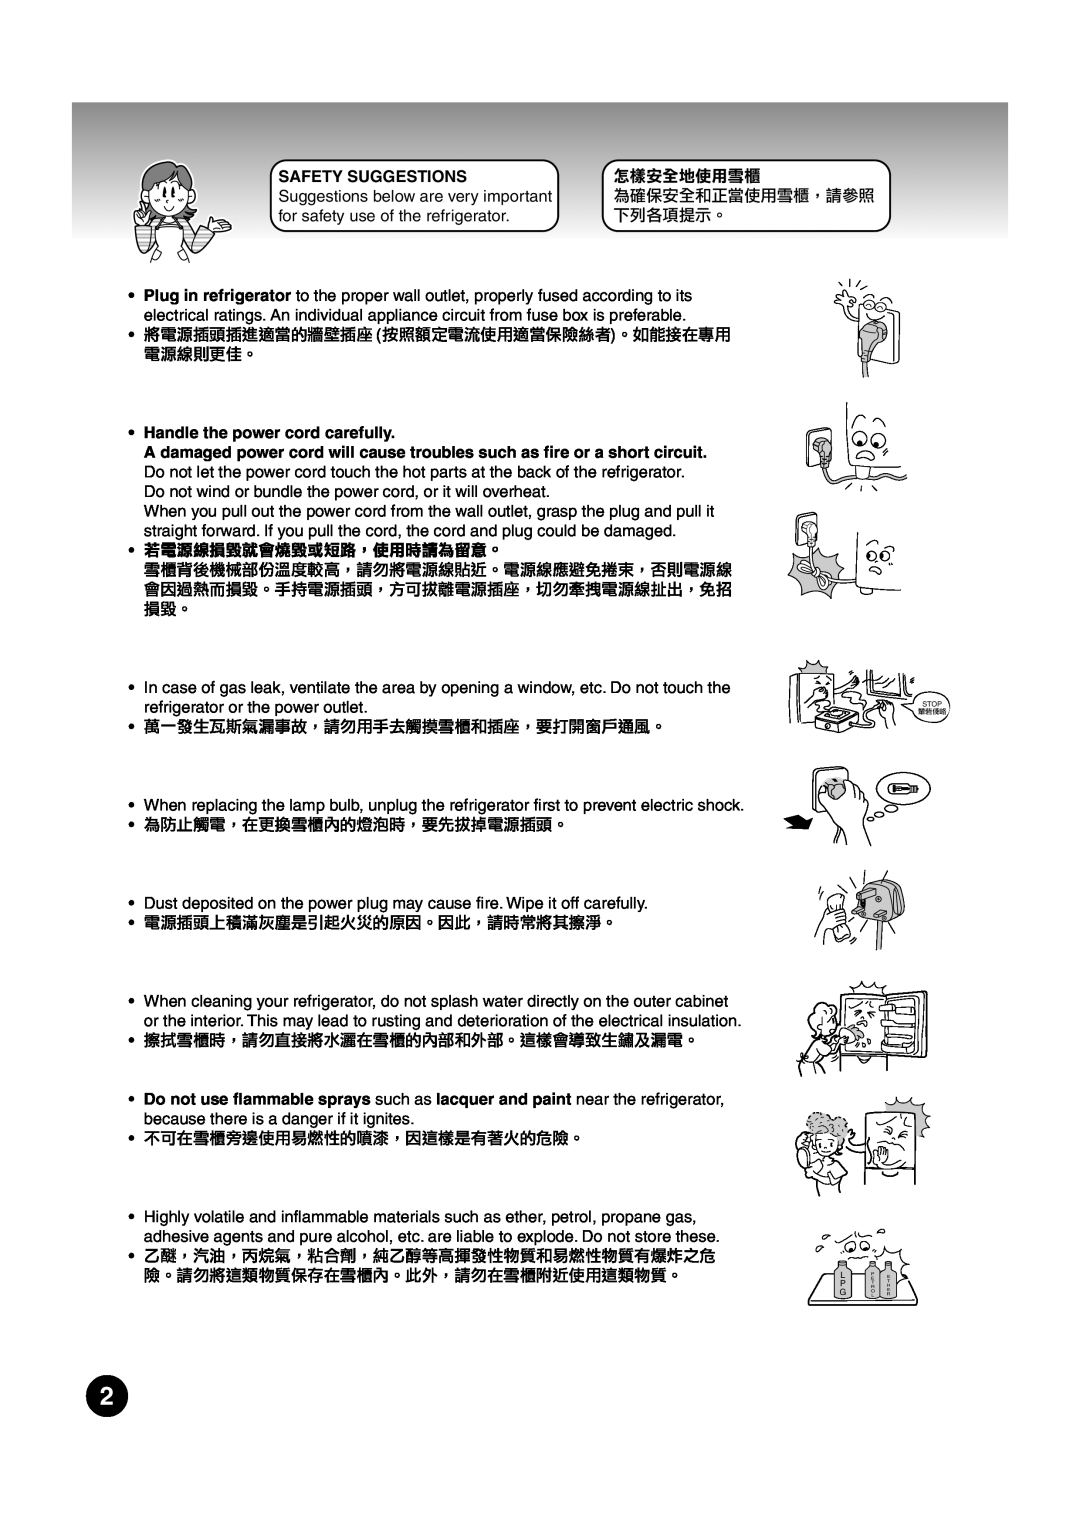 Hitachi R-S37SVH, R-S37SVND, R-S37SVS operation manual Safety Suggestions, Handle the power cord carefully 